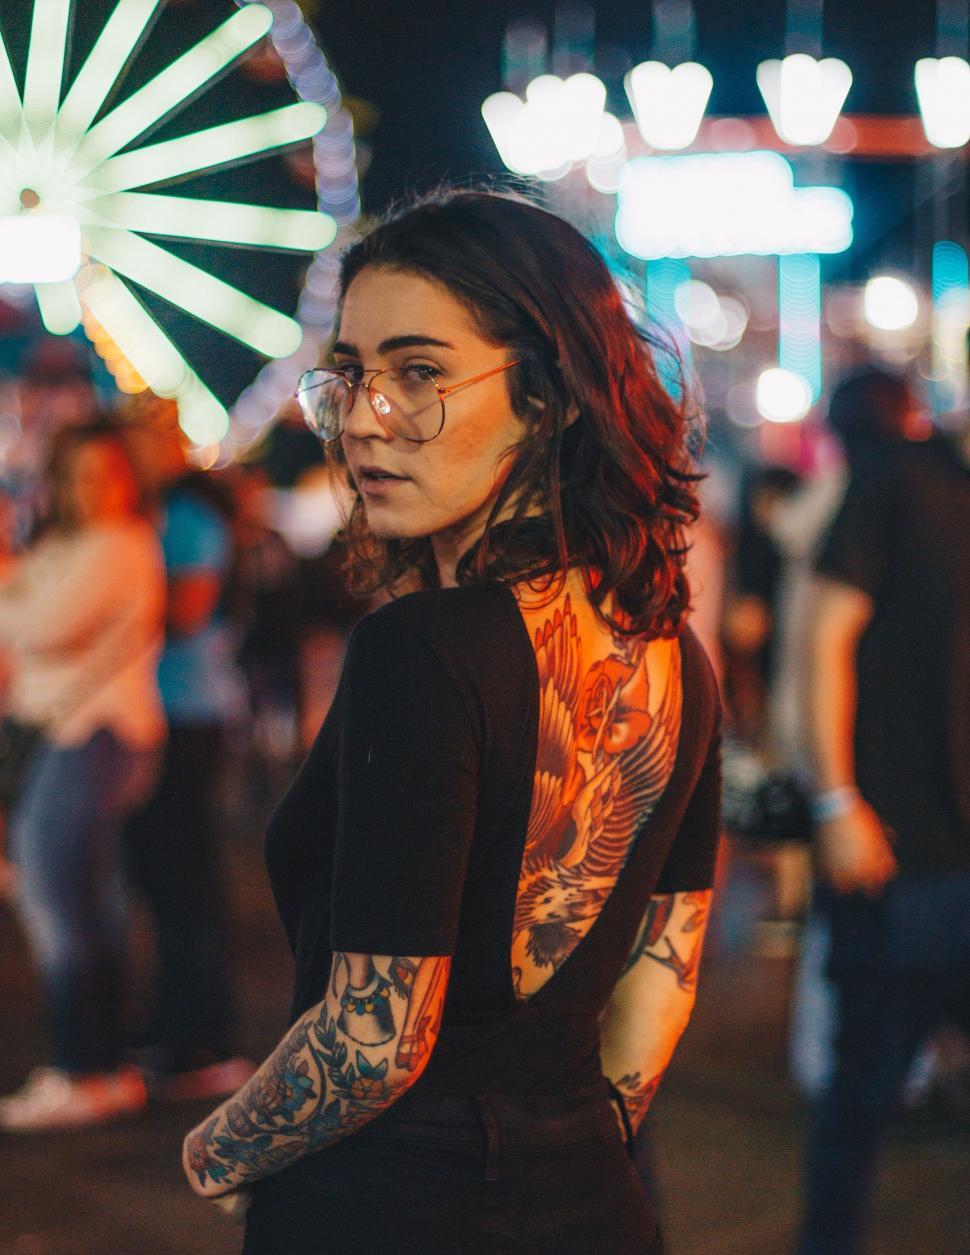 Free Image of Woman With Tattoos Standing in Front of Ferris Wheel 